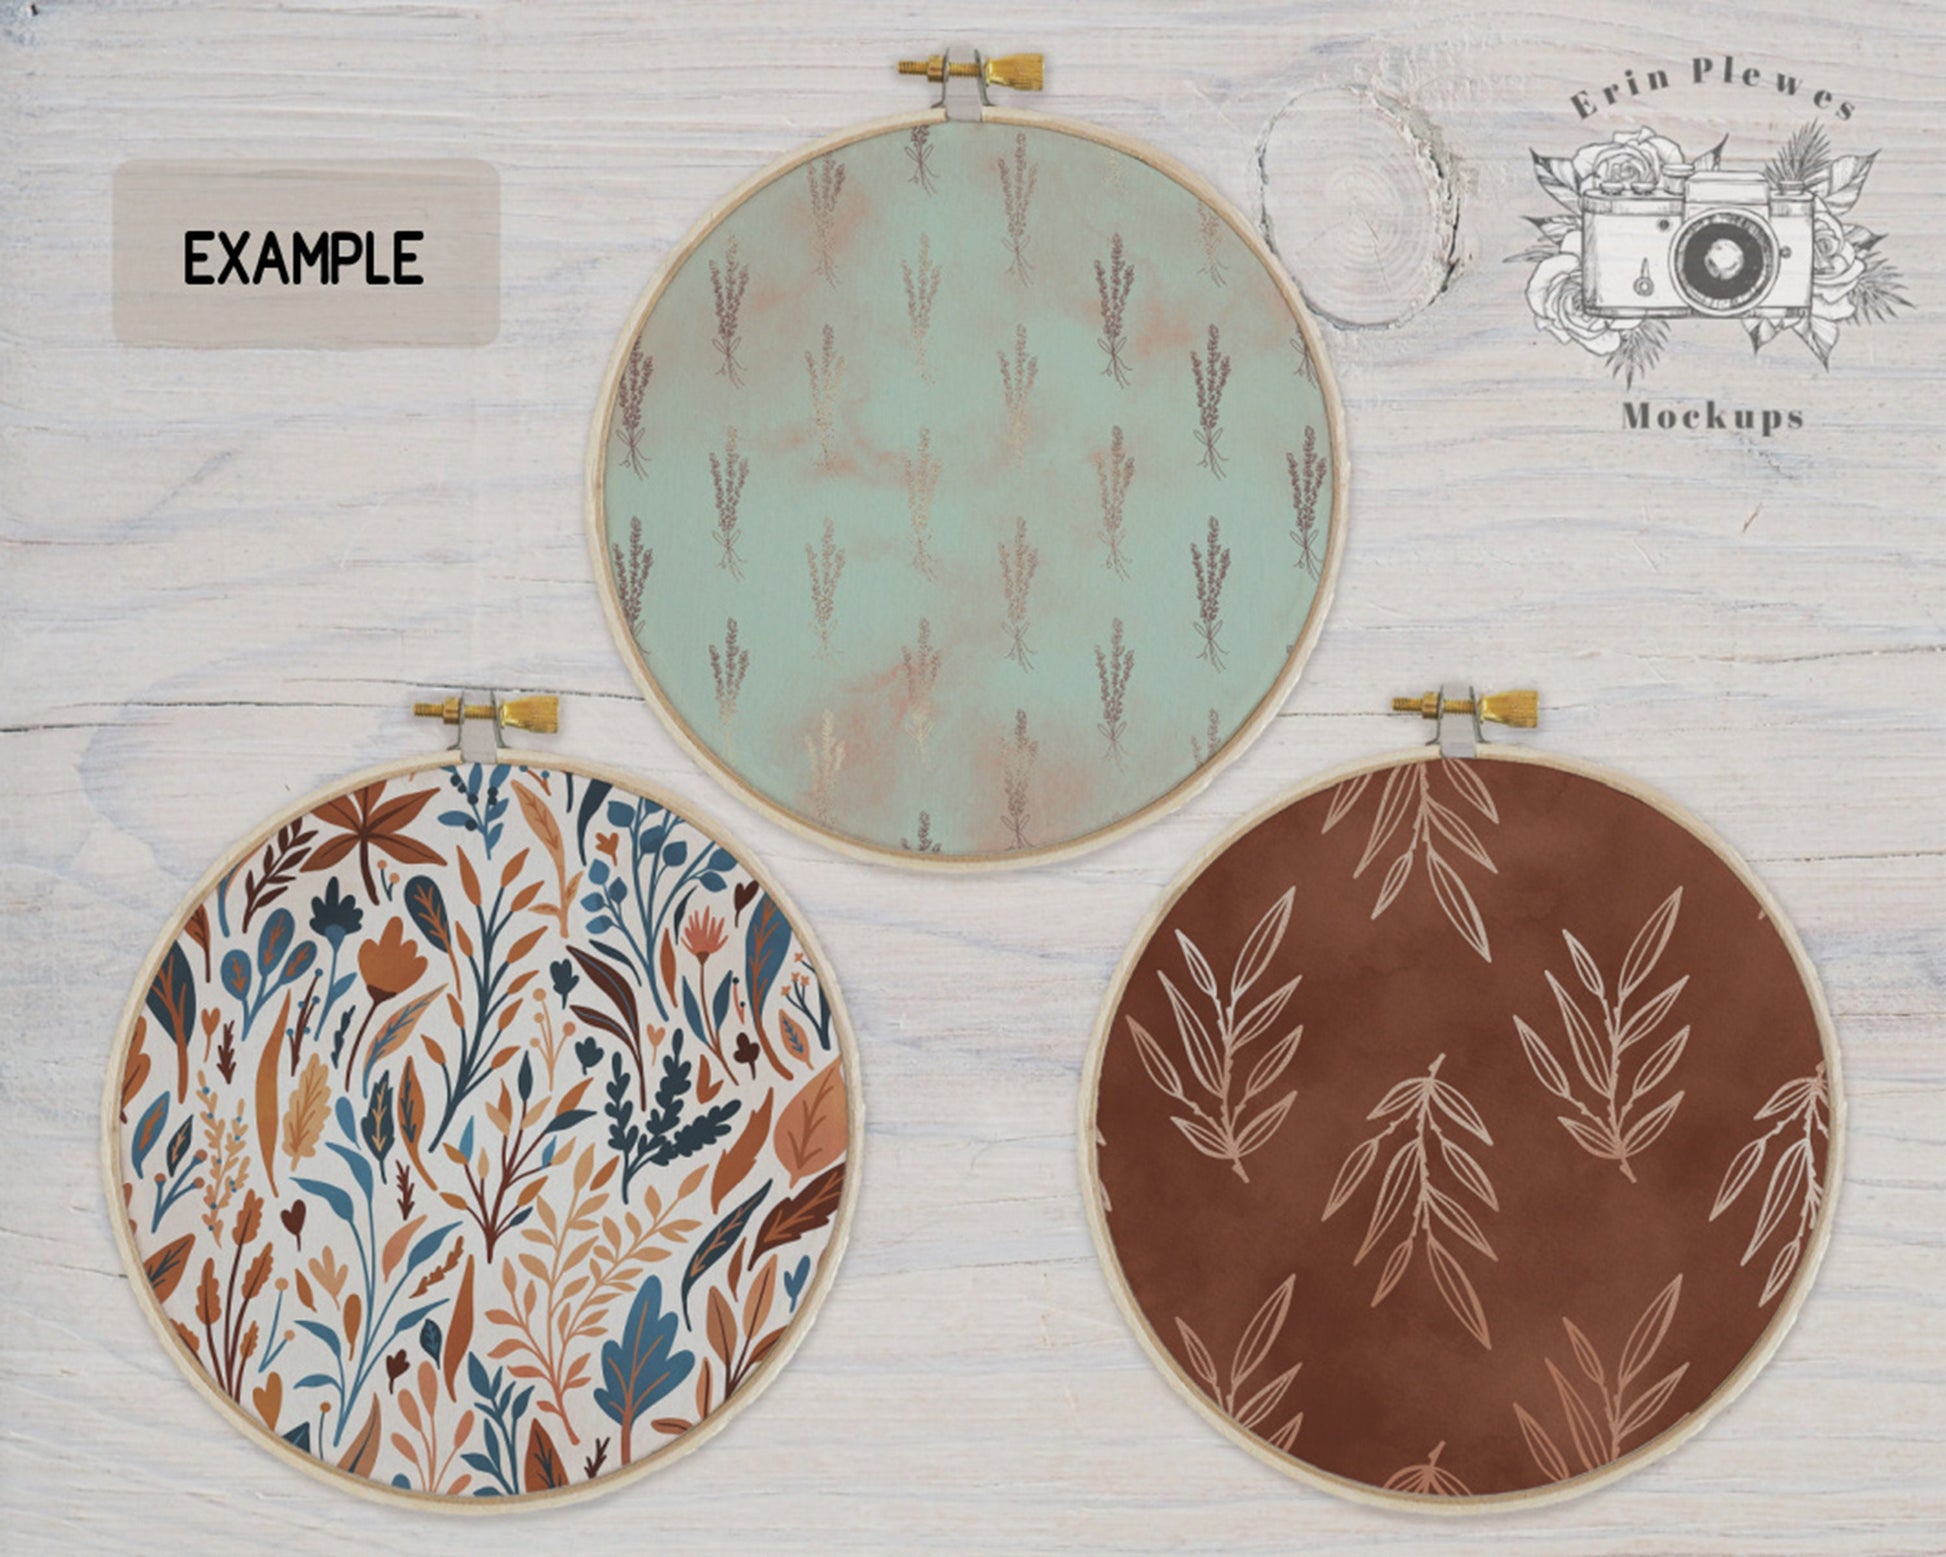 Embroidery Hoop Mockup Set of 3, Sewing Mock Up on Rustic White Wood, JPG PNG PSD Smart Object Digital Download Template